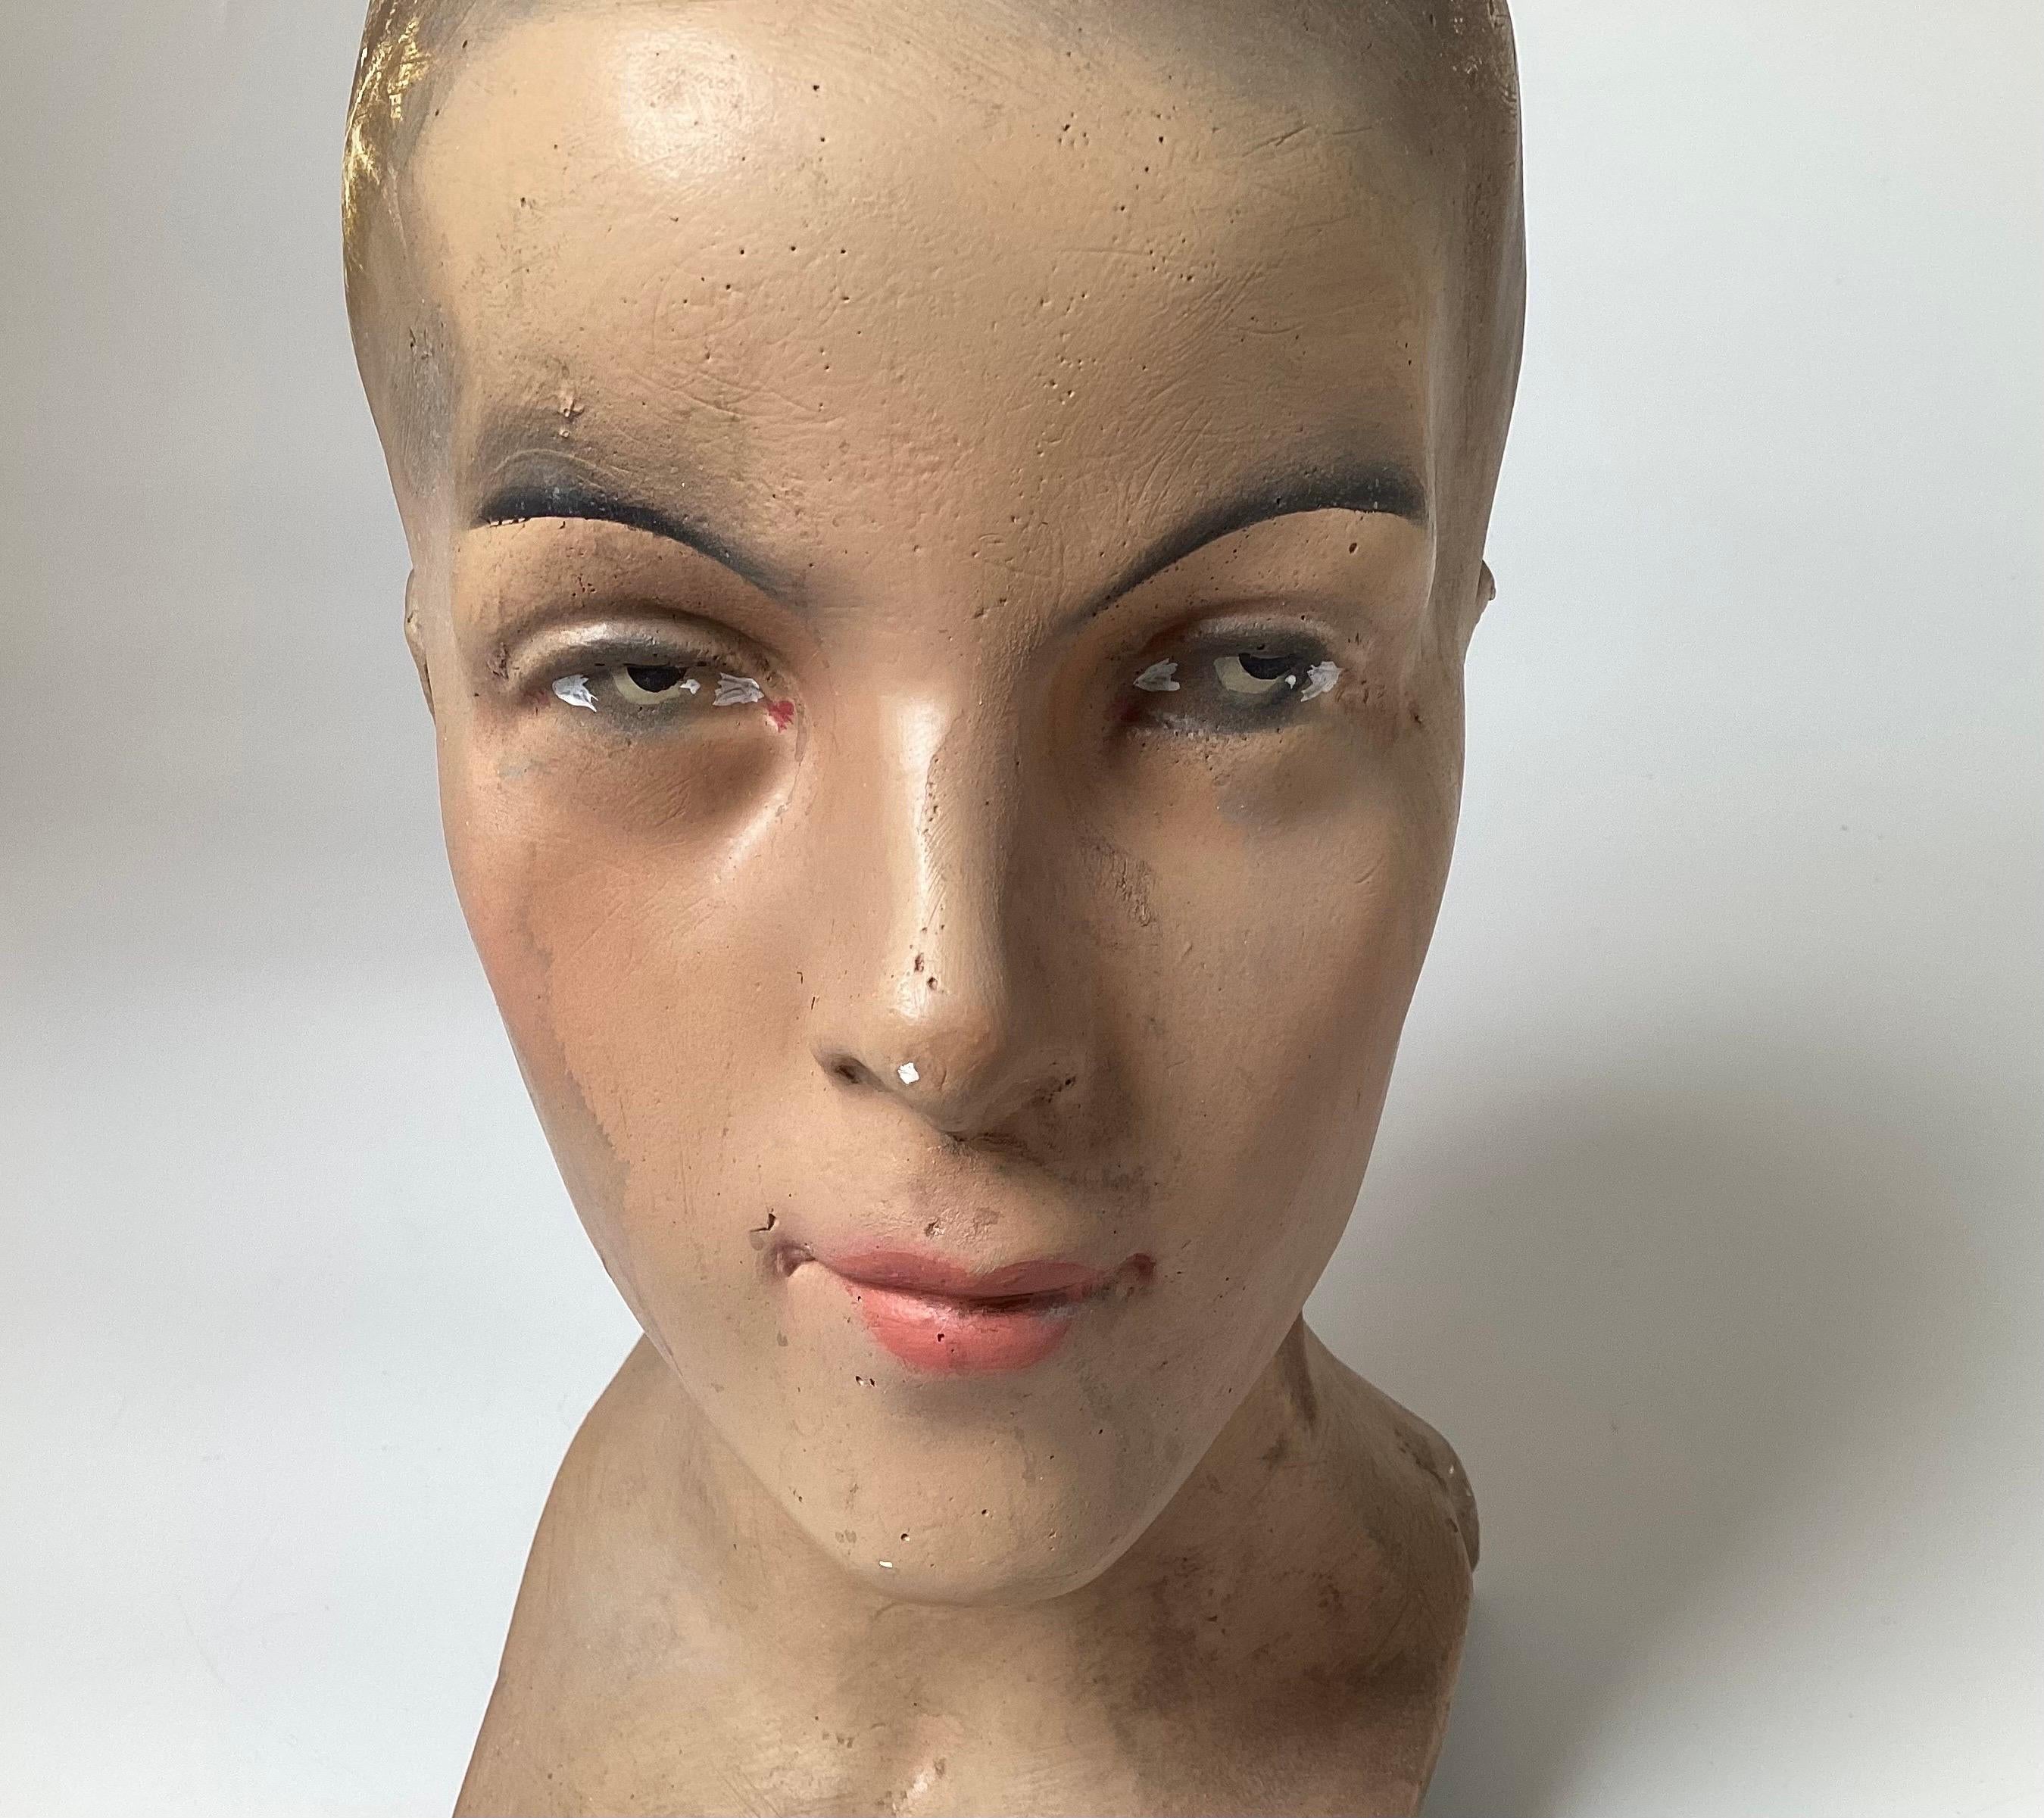 Mid-20th Century European Young Male Mannequin Head